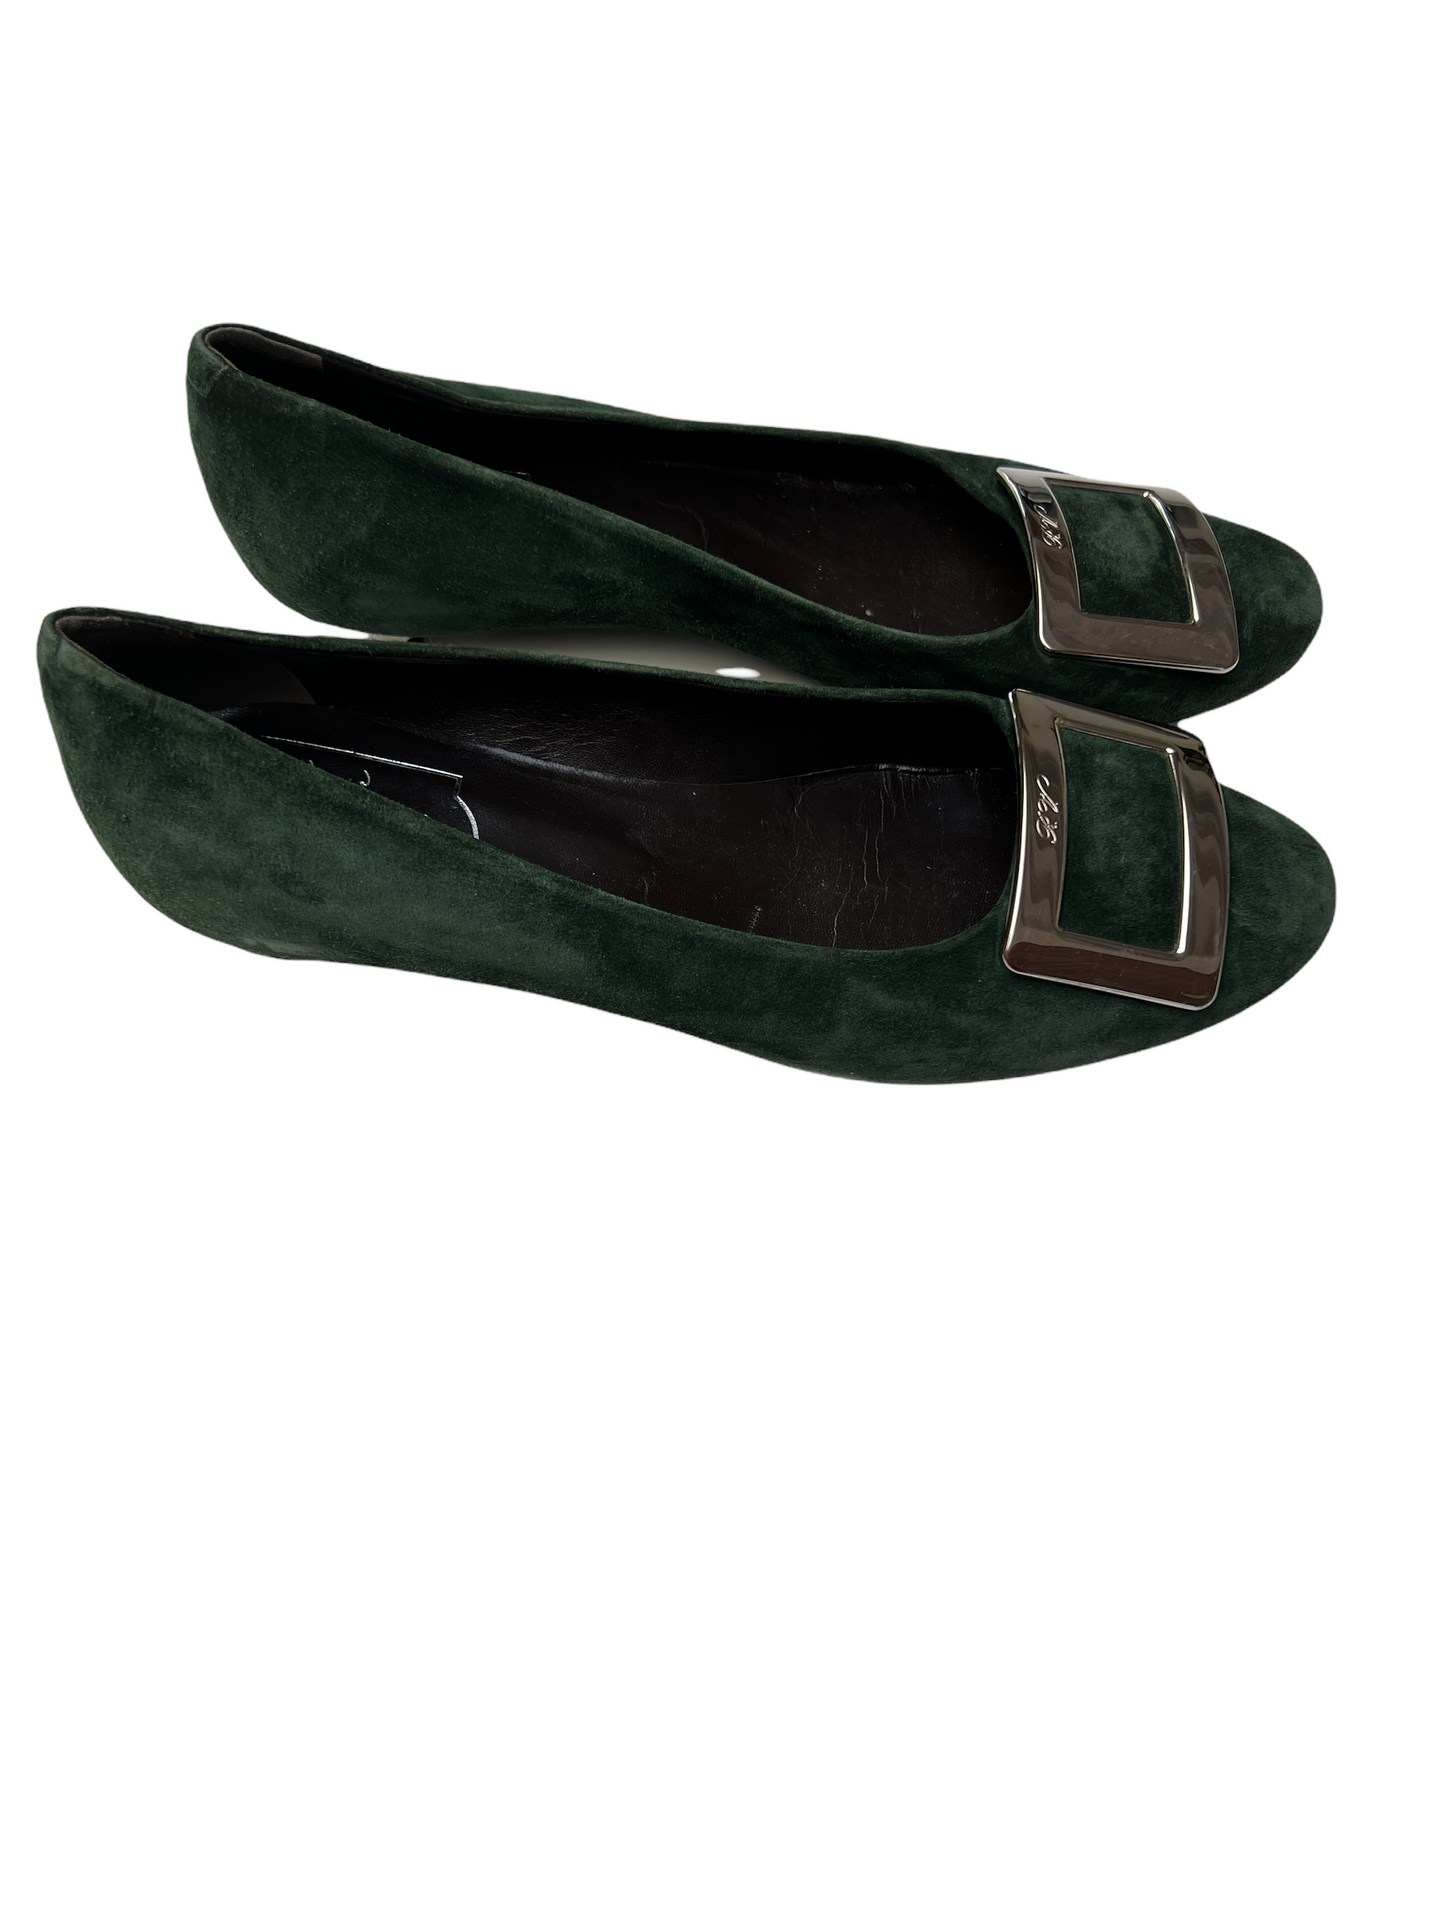 Green Suede Flats - 7.5